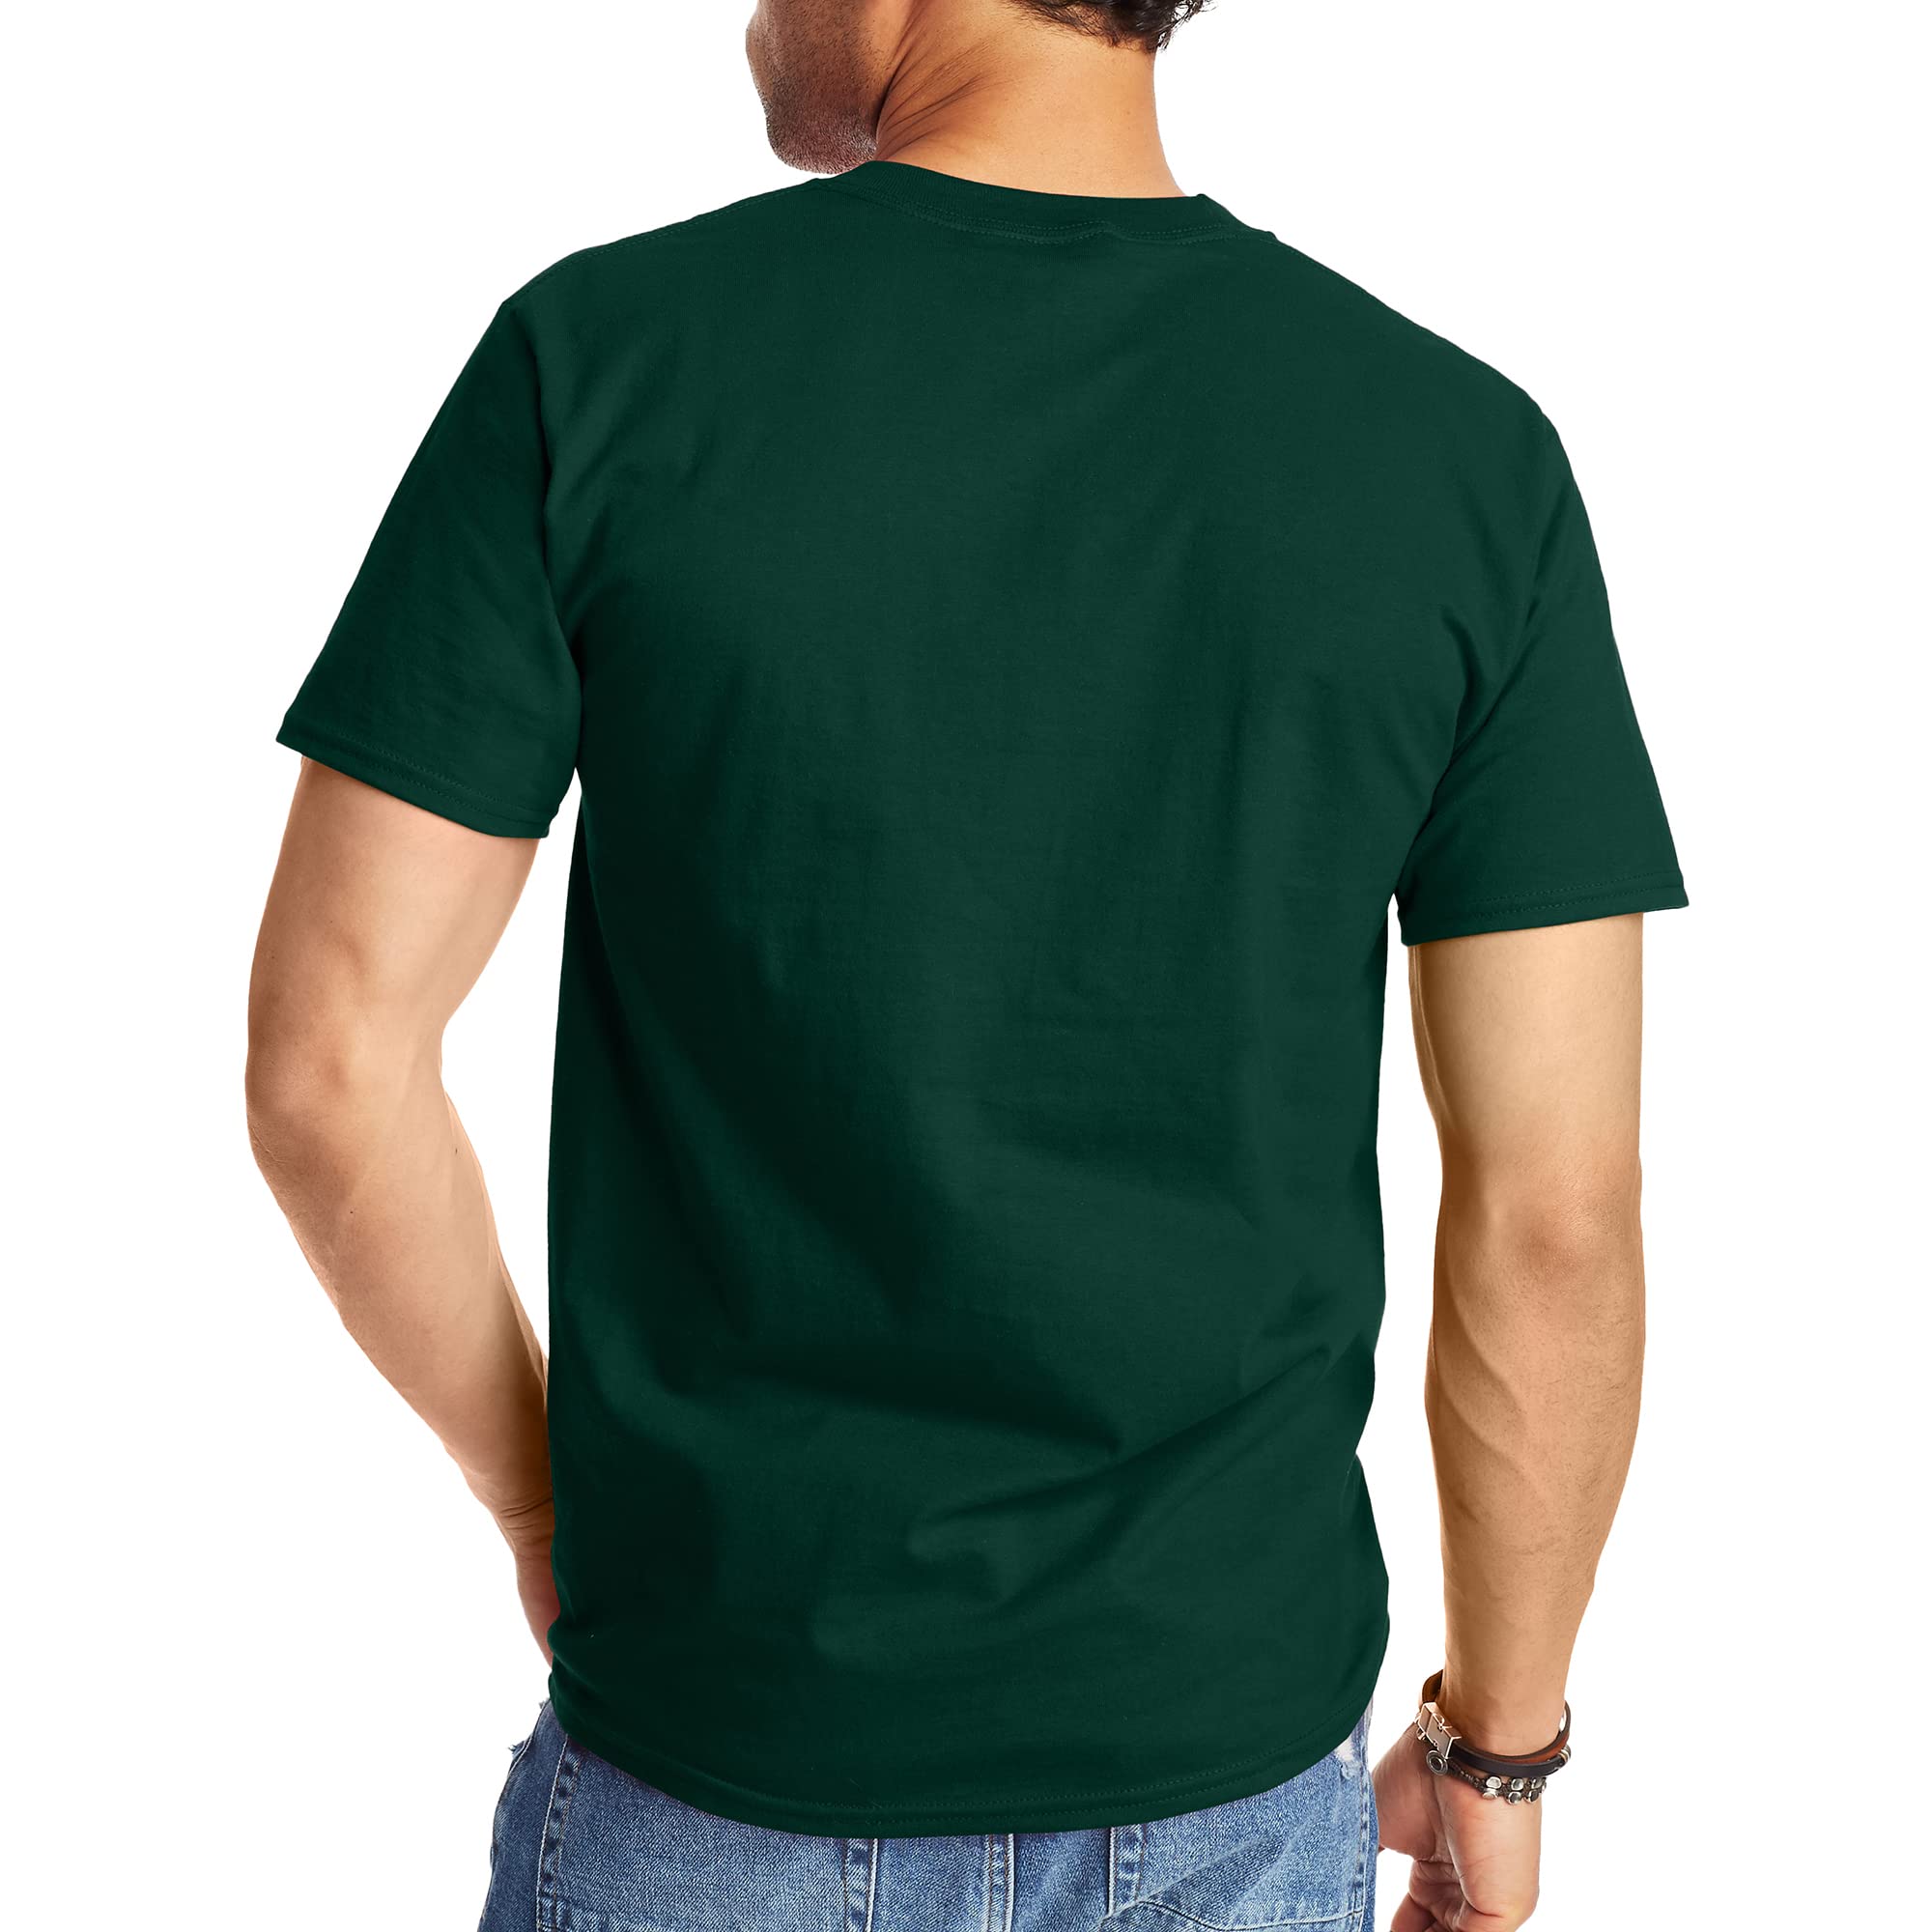 Hanes Men's Standard BeefyT T-Shirt, Heavyweight Cotton Crewneck Tee, 1 or 2 Pack, Available in Tall Sizes, DEEP Forest-1 Pack, 4X Large